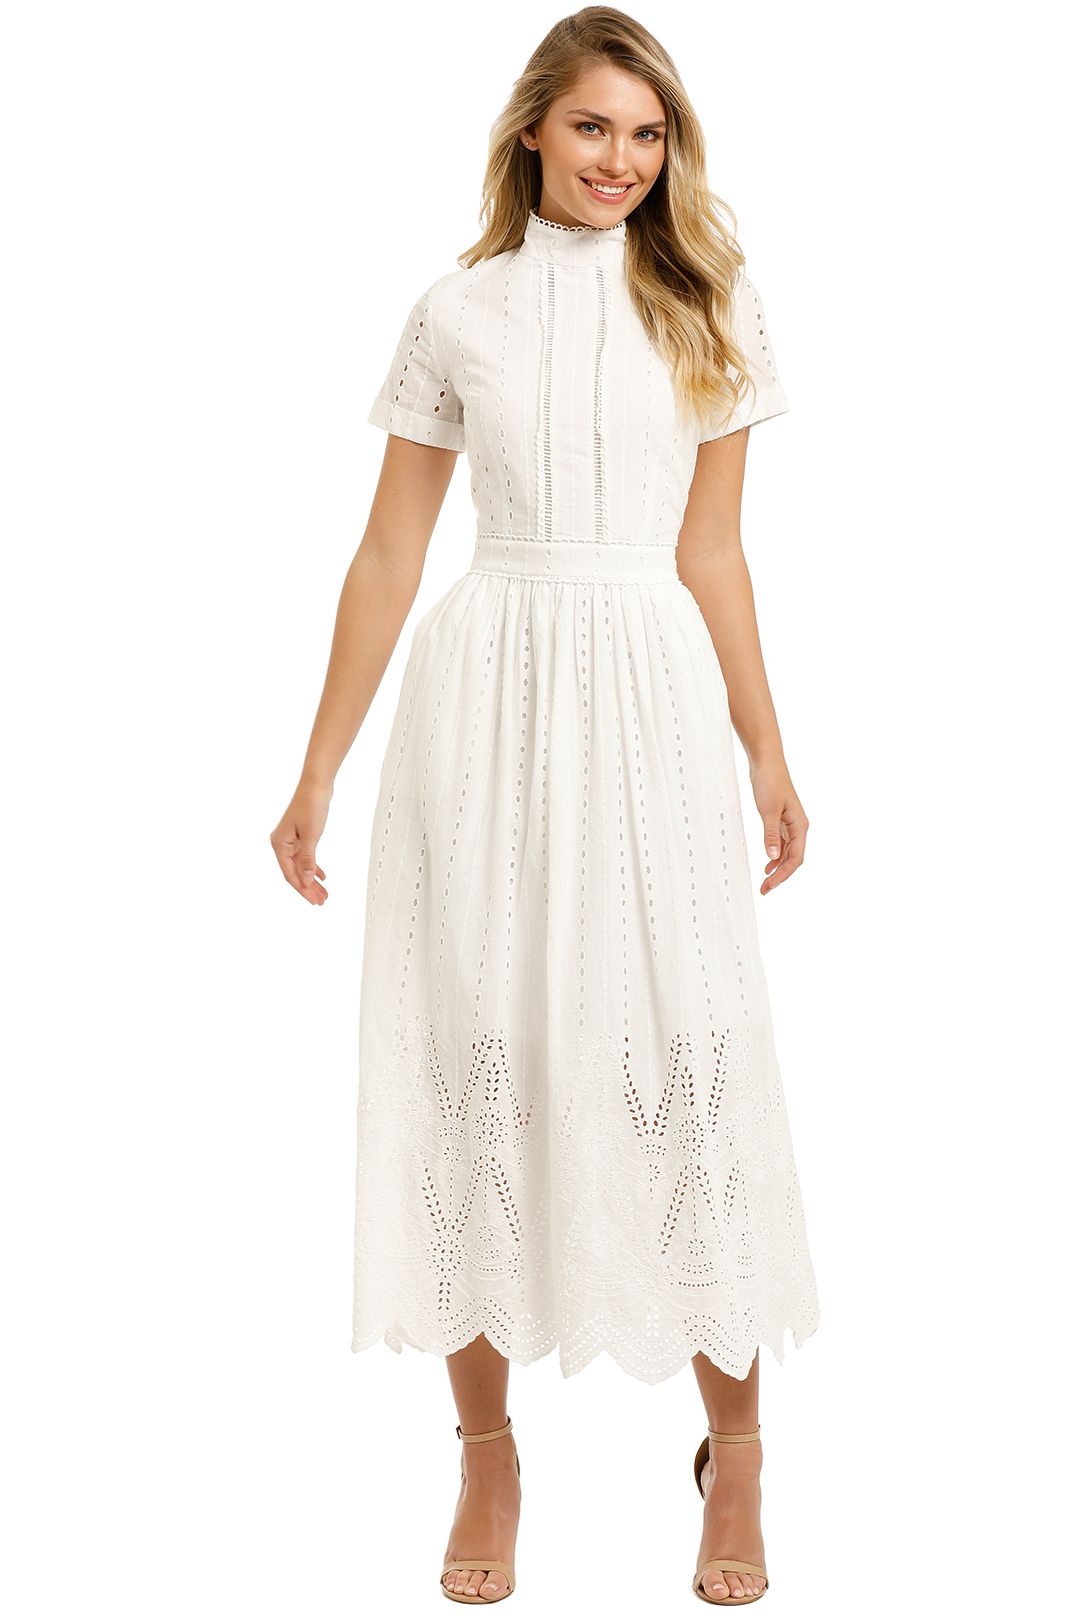 Lola High Neck Dress in White by We Are Kindred for Hire ...